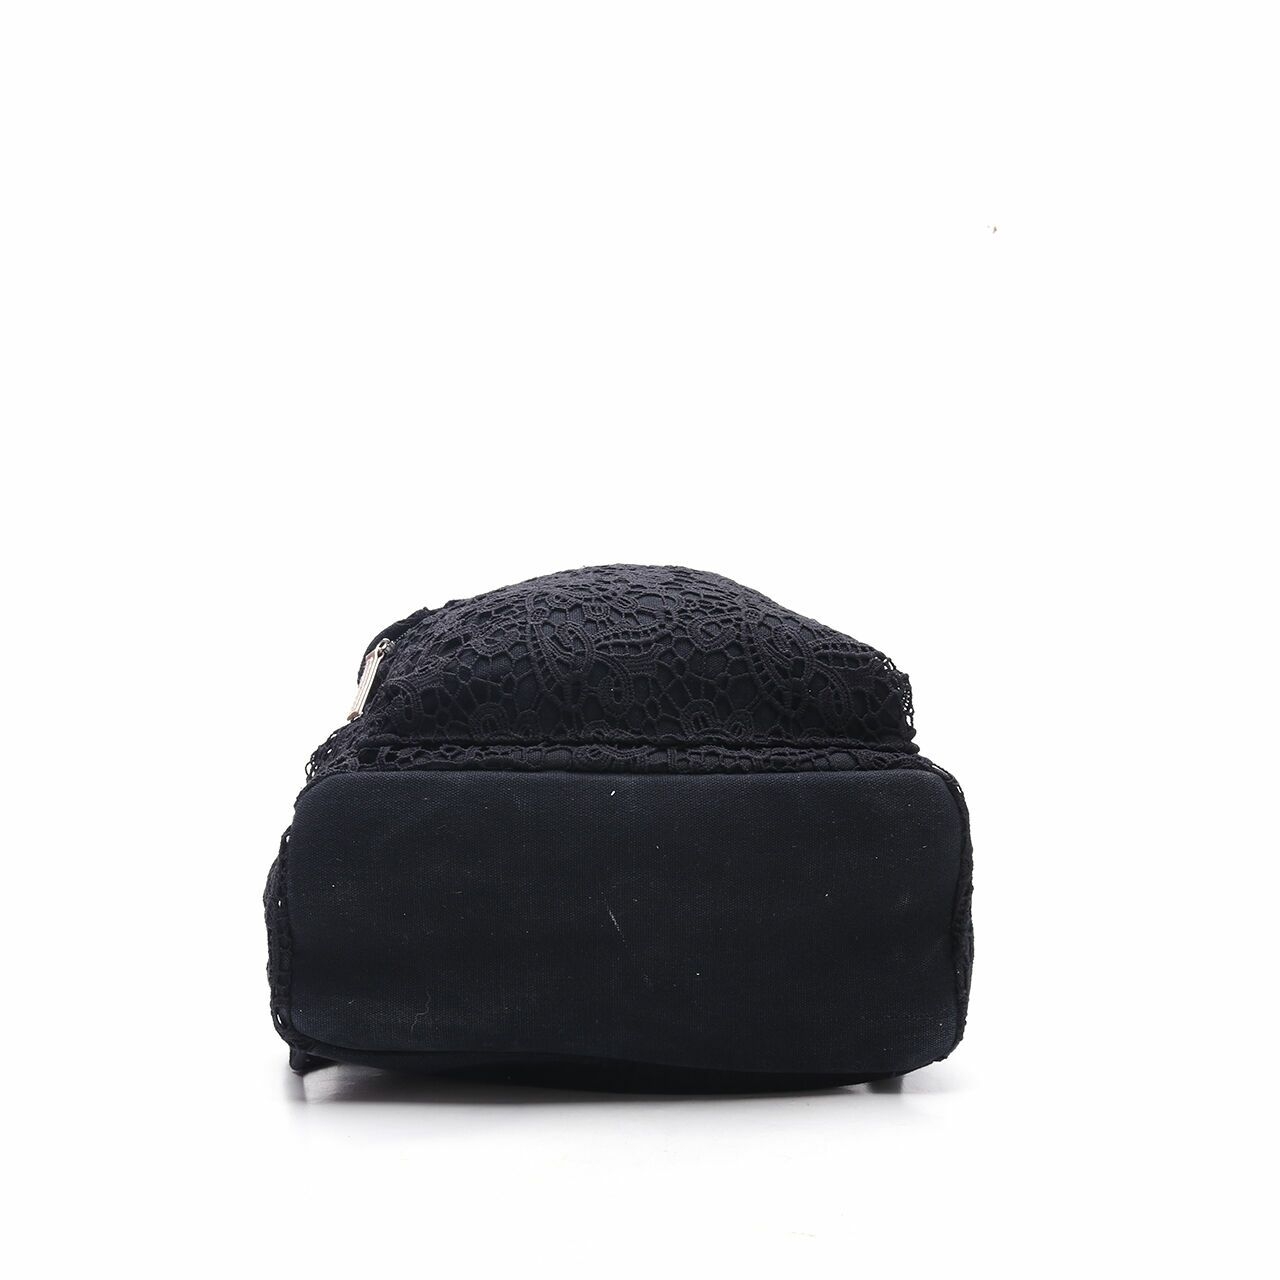 Typo Black Lace Backpack